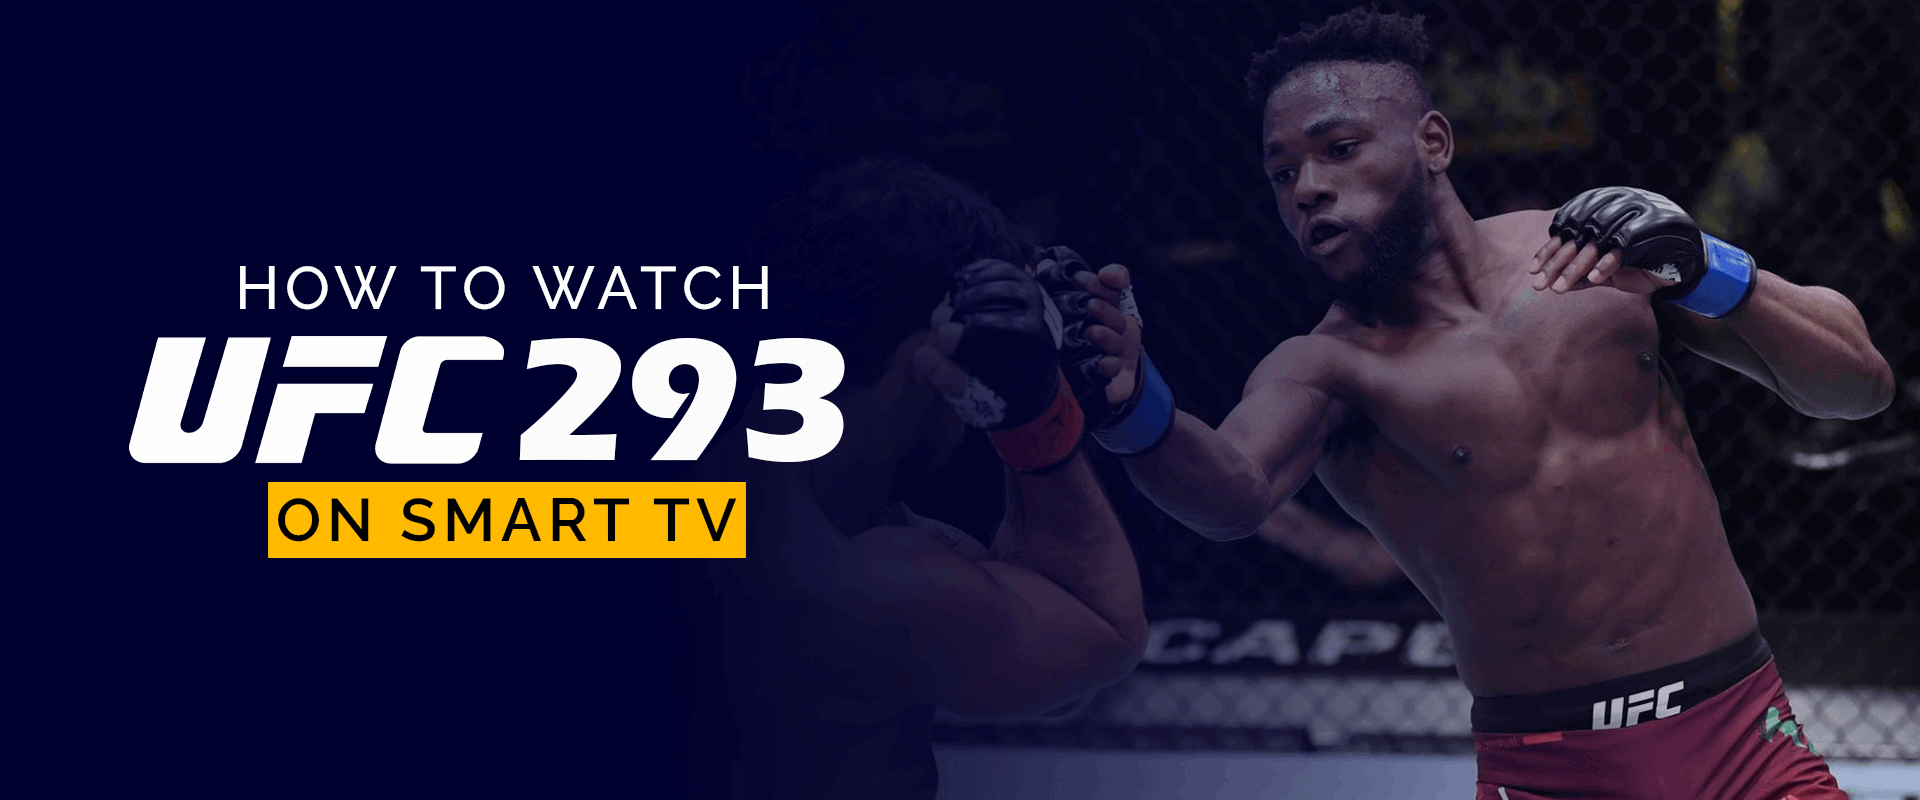 How to Watch UFC 293 on Smart TV